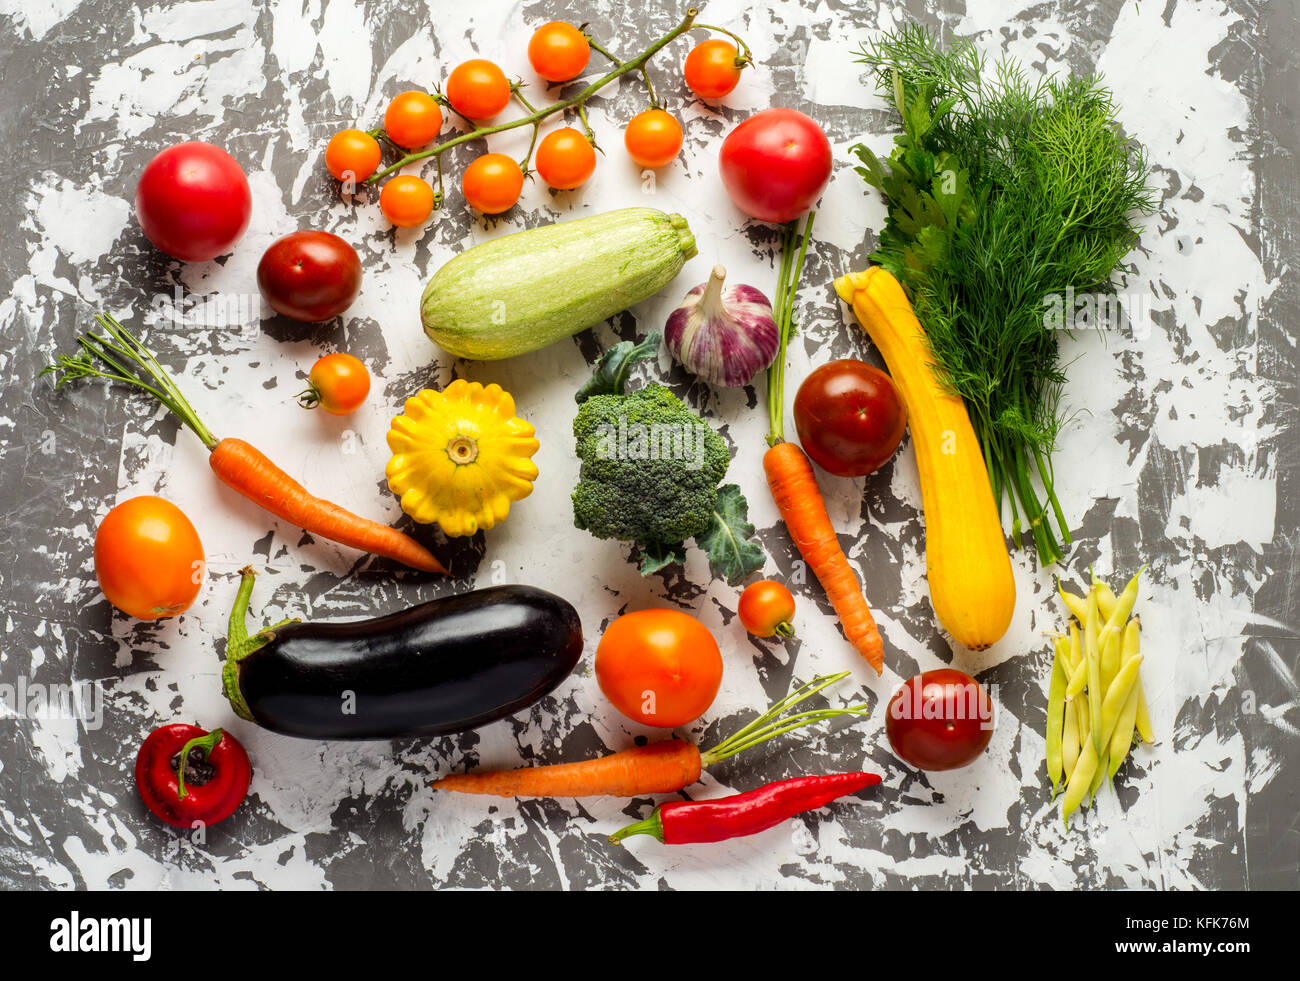 Raw organic vegetables with fresh ingredients for healthily cooking on concrete background, top view, banner. Vegan or diet food concept. Stock Photo